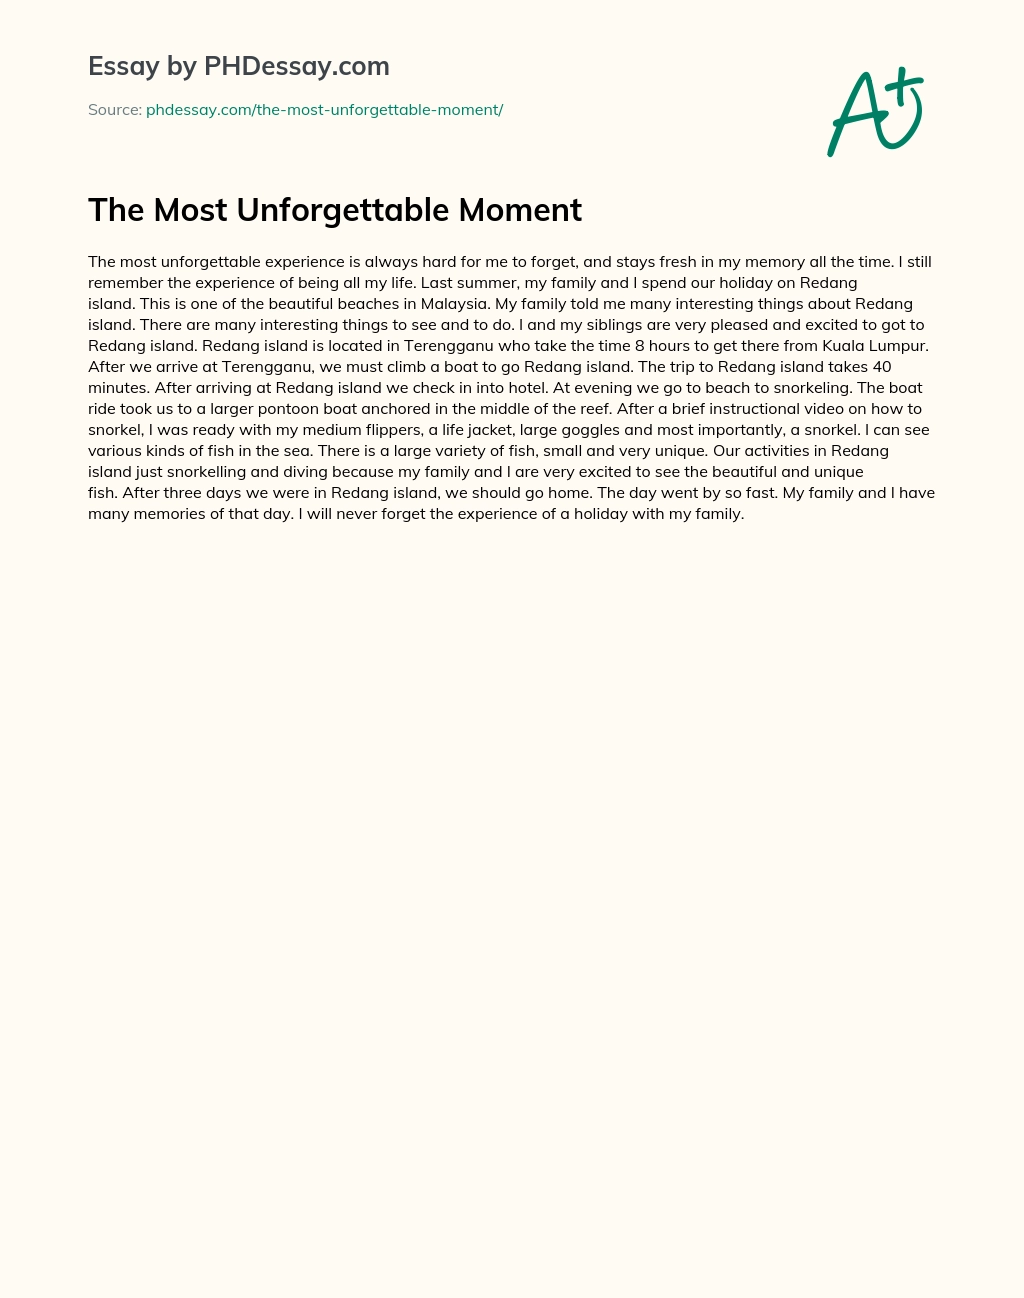 The Most Unforgettable Moment essay